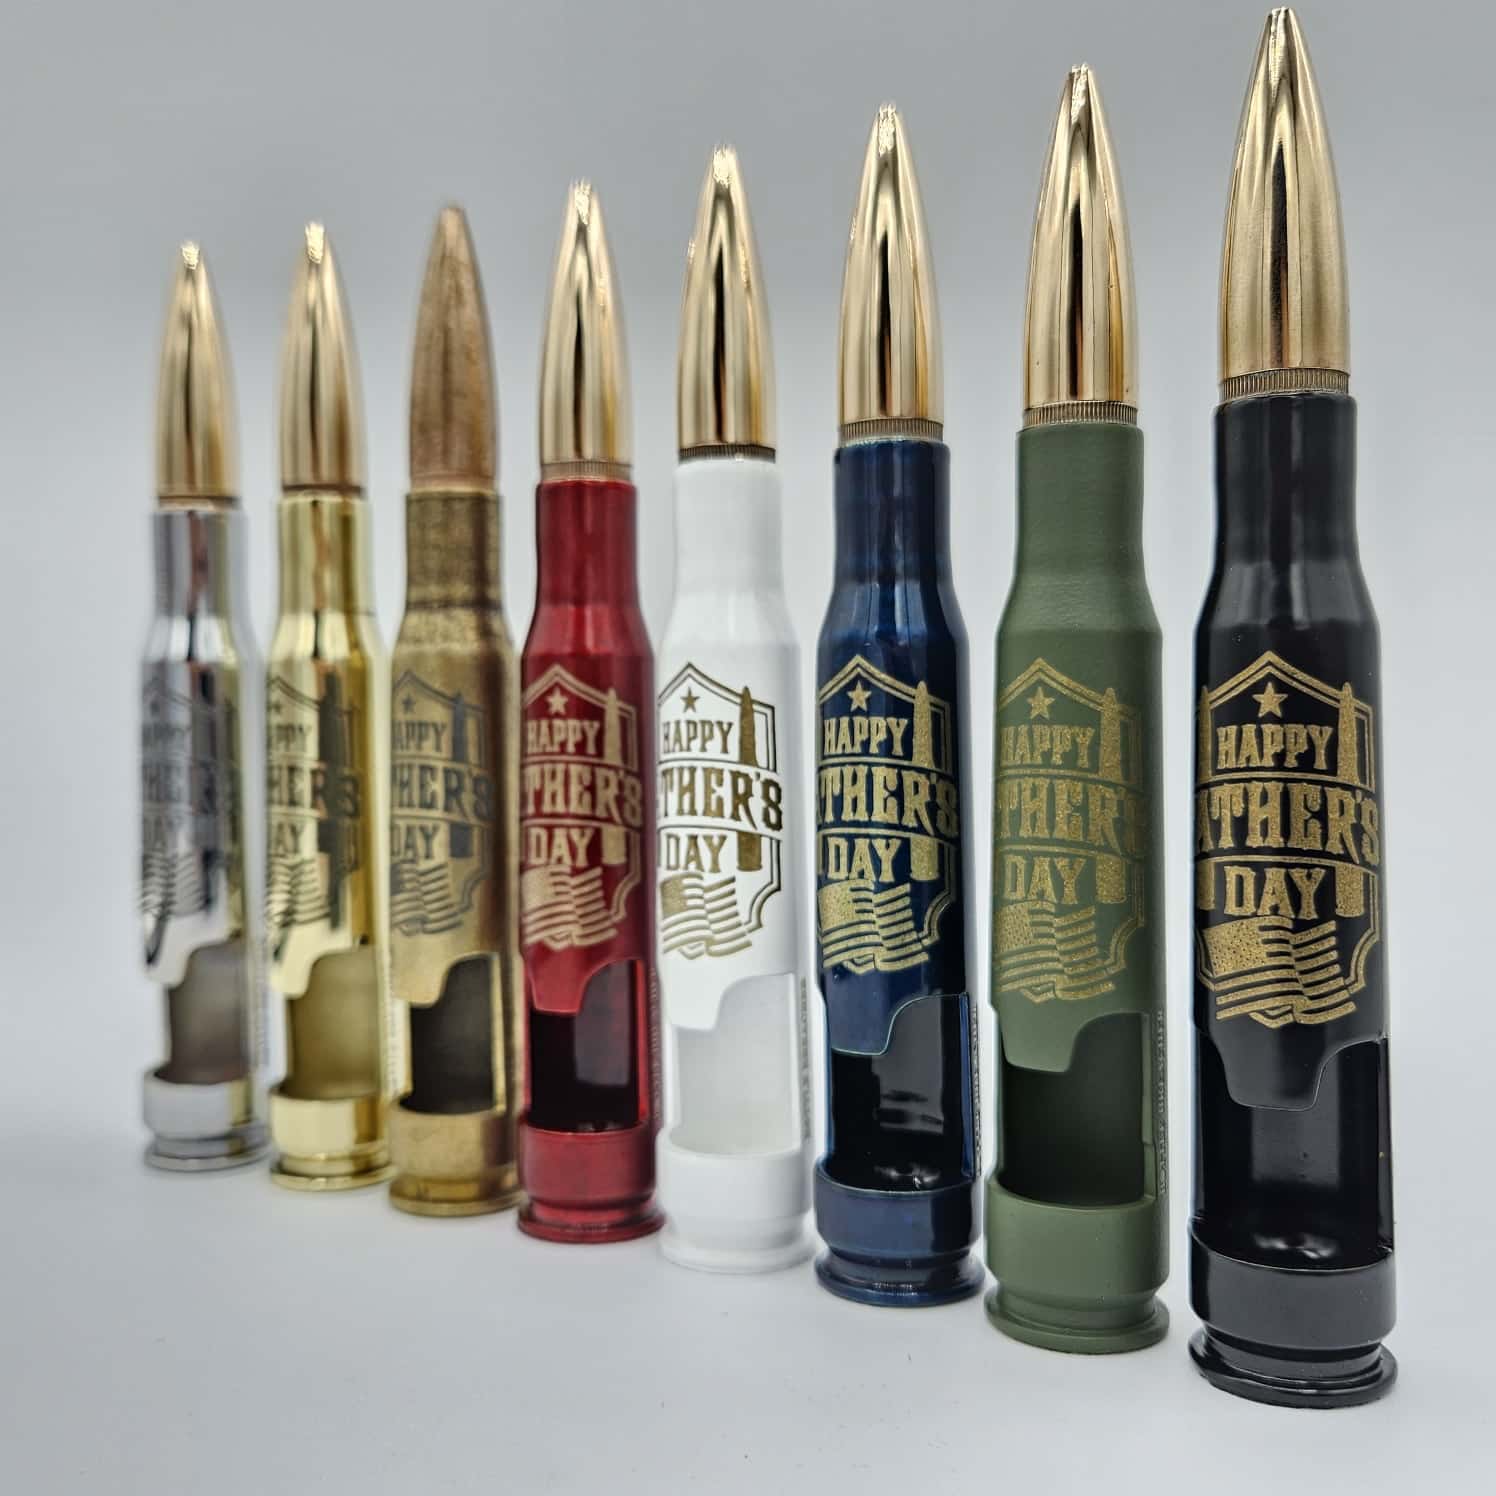 Happy Father's Day .50 cal bullet bottle opener line up in every color vaiation